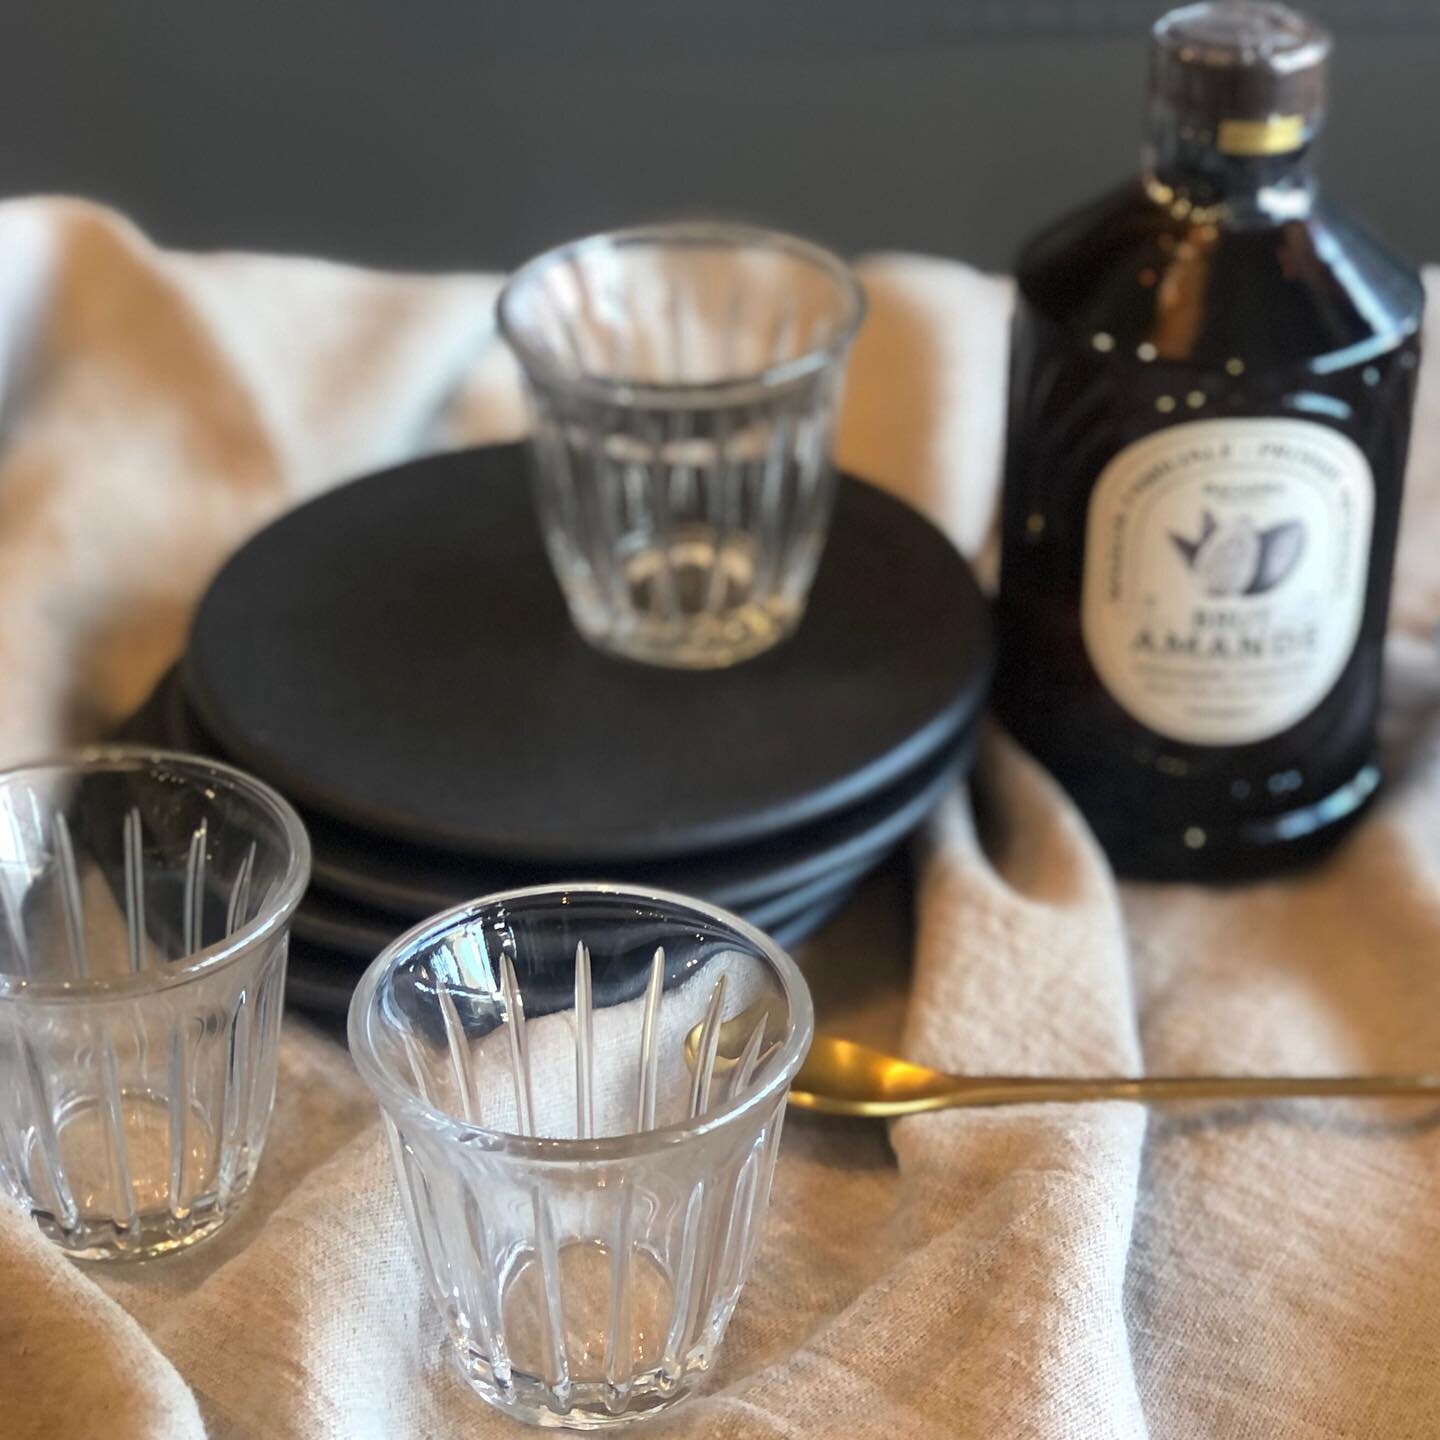 Sweetest glass espresso cups have arrived! These would look so pretty on open kitchen shelving, gives a little light and sparkle! 
Made in France, open stock.